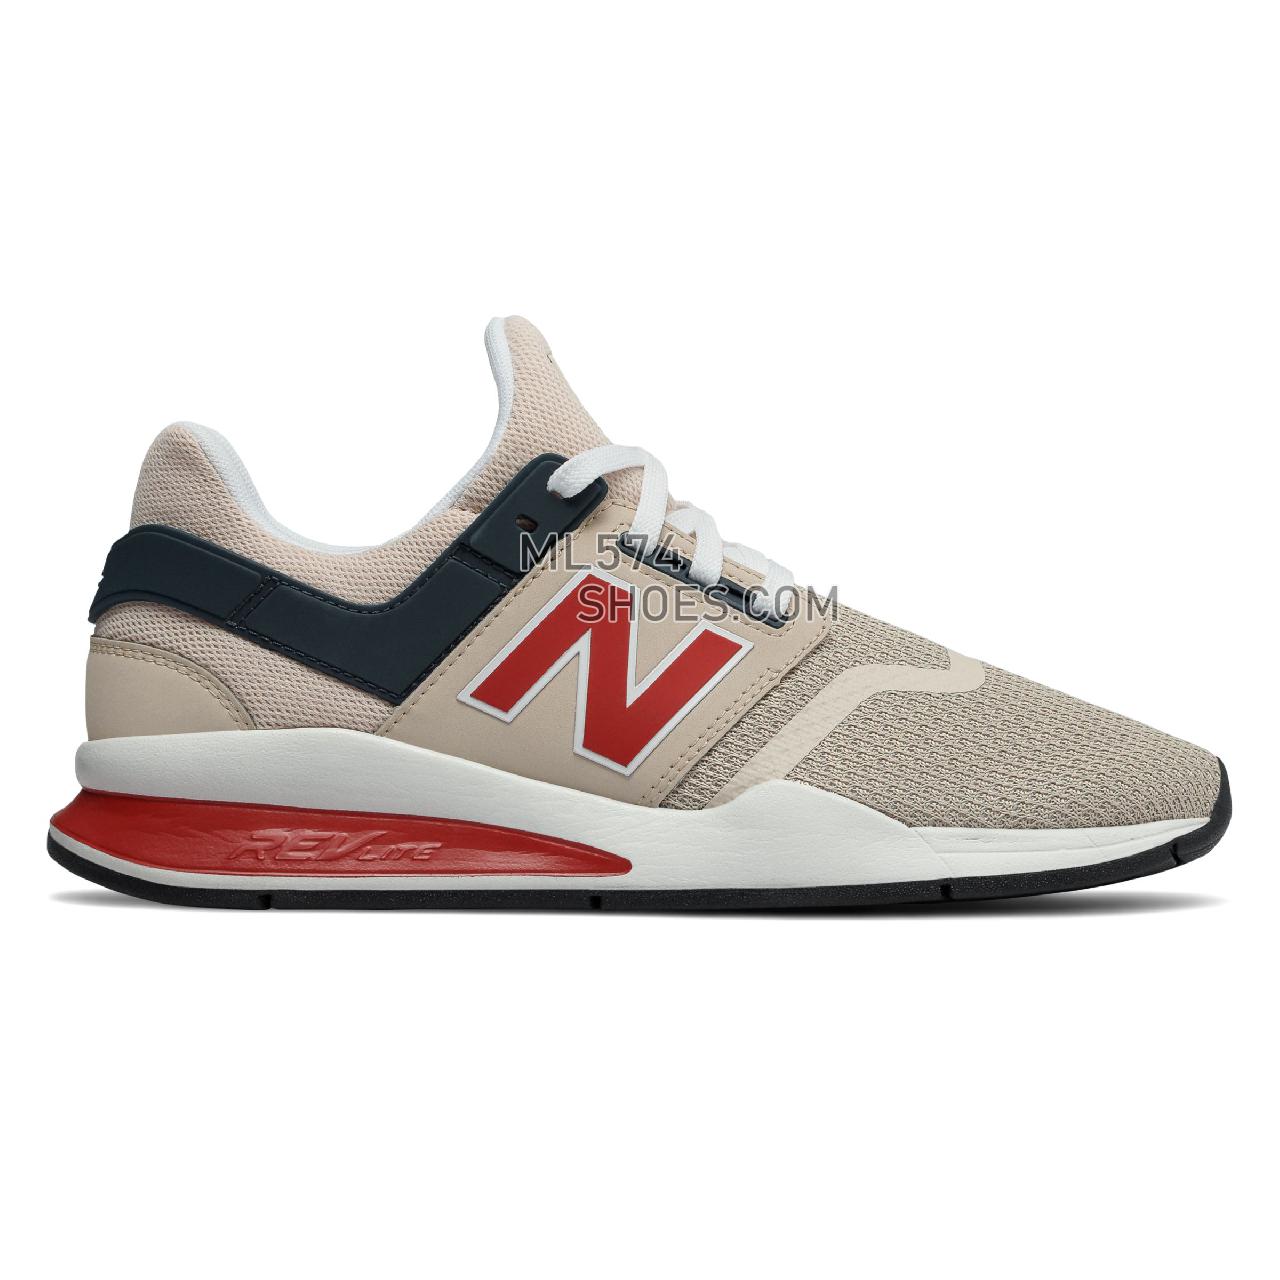 New Balance 247 - Men's 247 - Classic Grey Morn with Team Red - MS247NMN